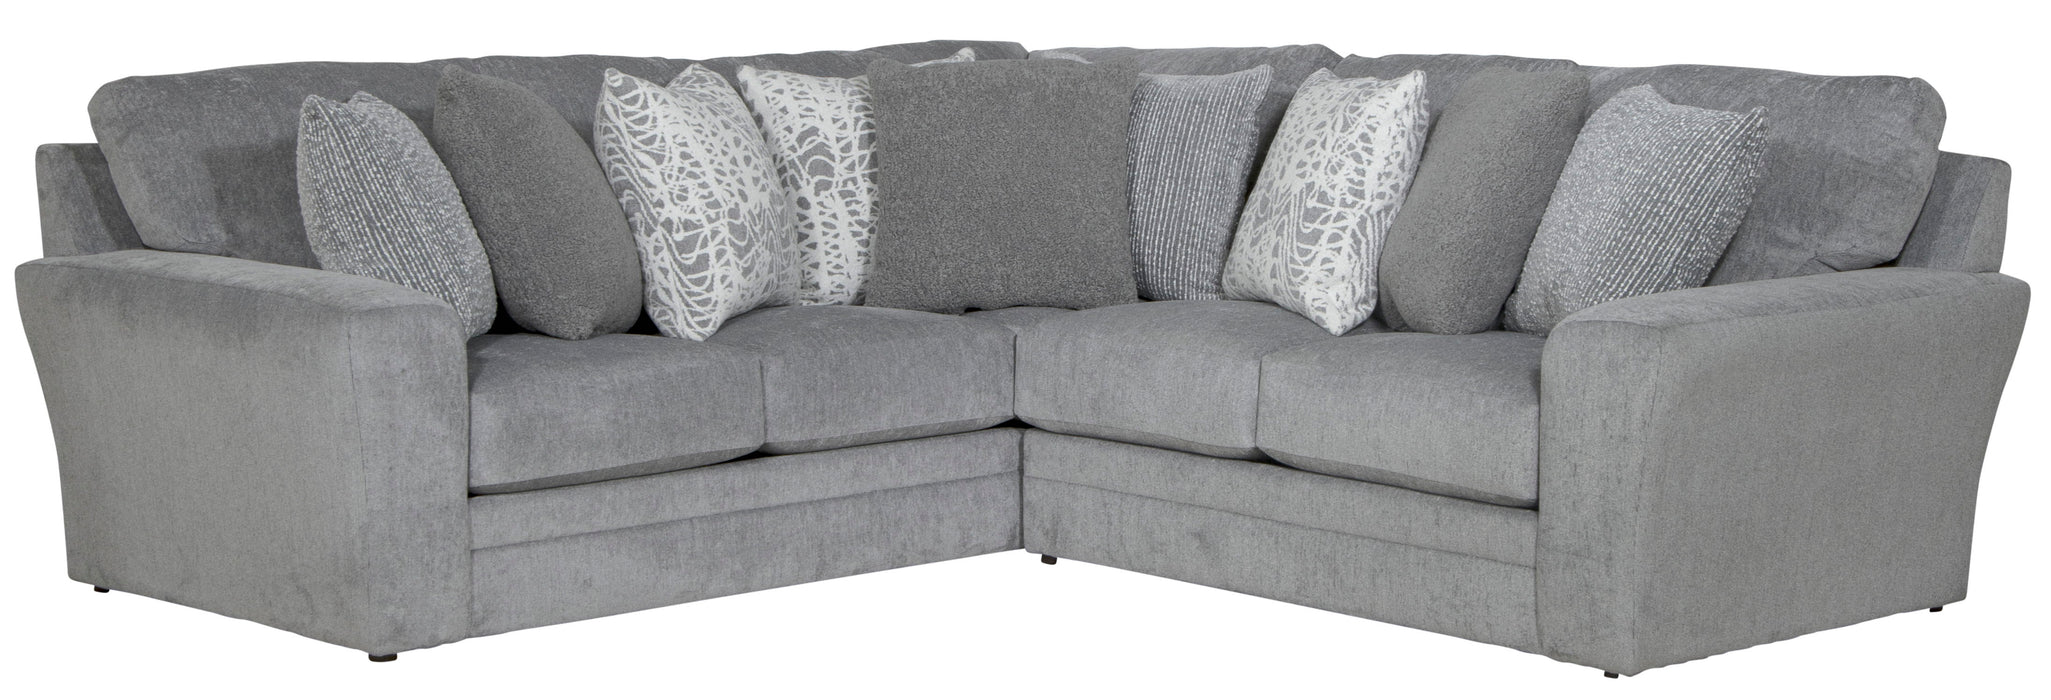 Glacier - 2 Piece Sectional With 9 Included Accent Pillows